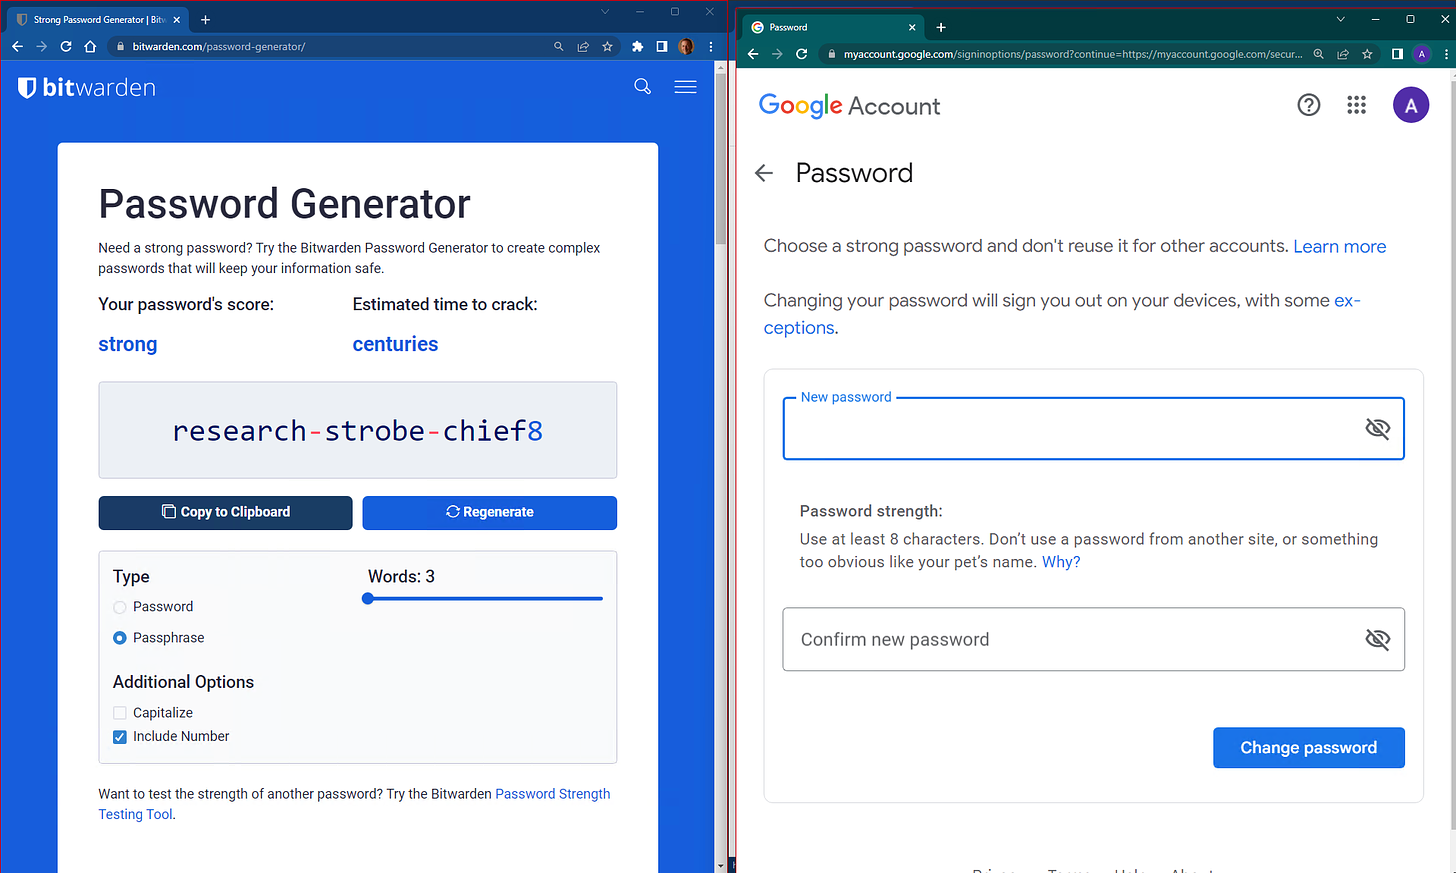 A screenshot showing two browser windows arranged side by side. On the left is the Bitwarden password generator. On the right is a window showing the New Password page for a Google account.